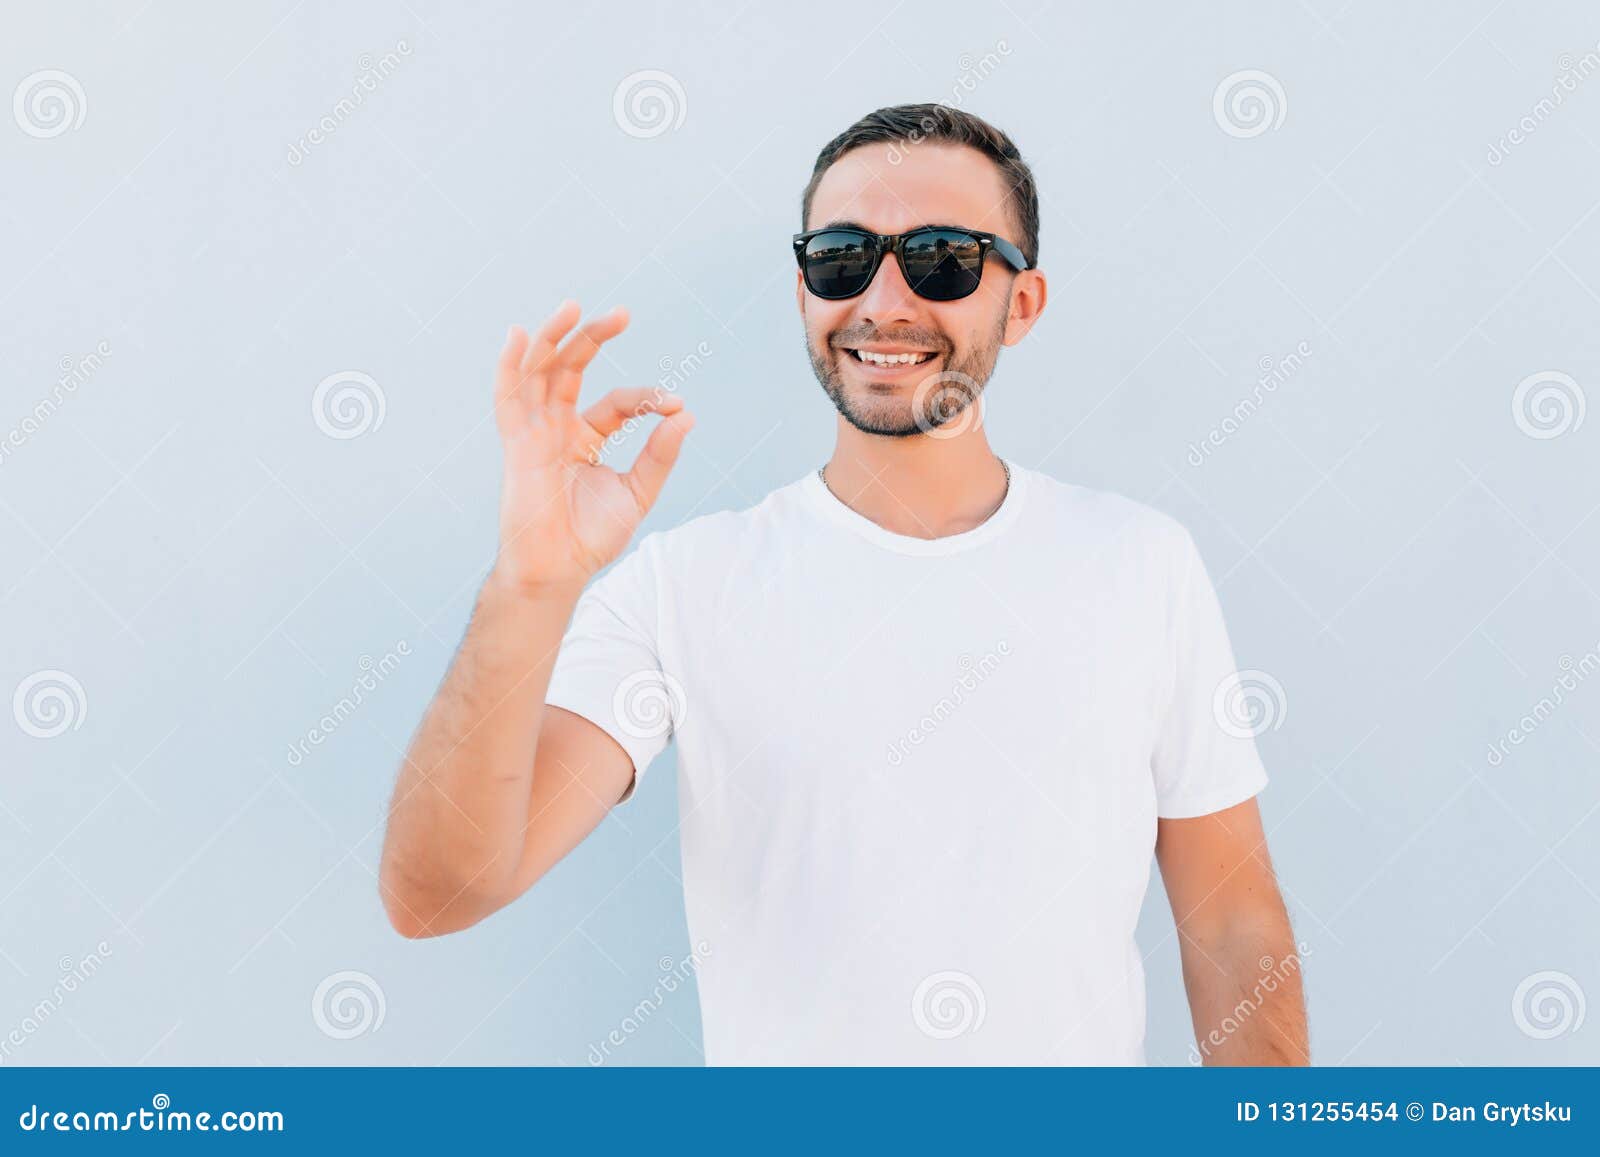 Young Smiling Man in Sunglasses Having Happy Look, Gesturing, Showing ...